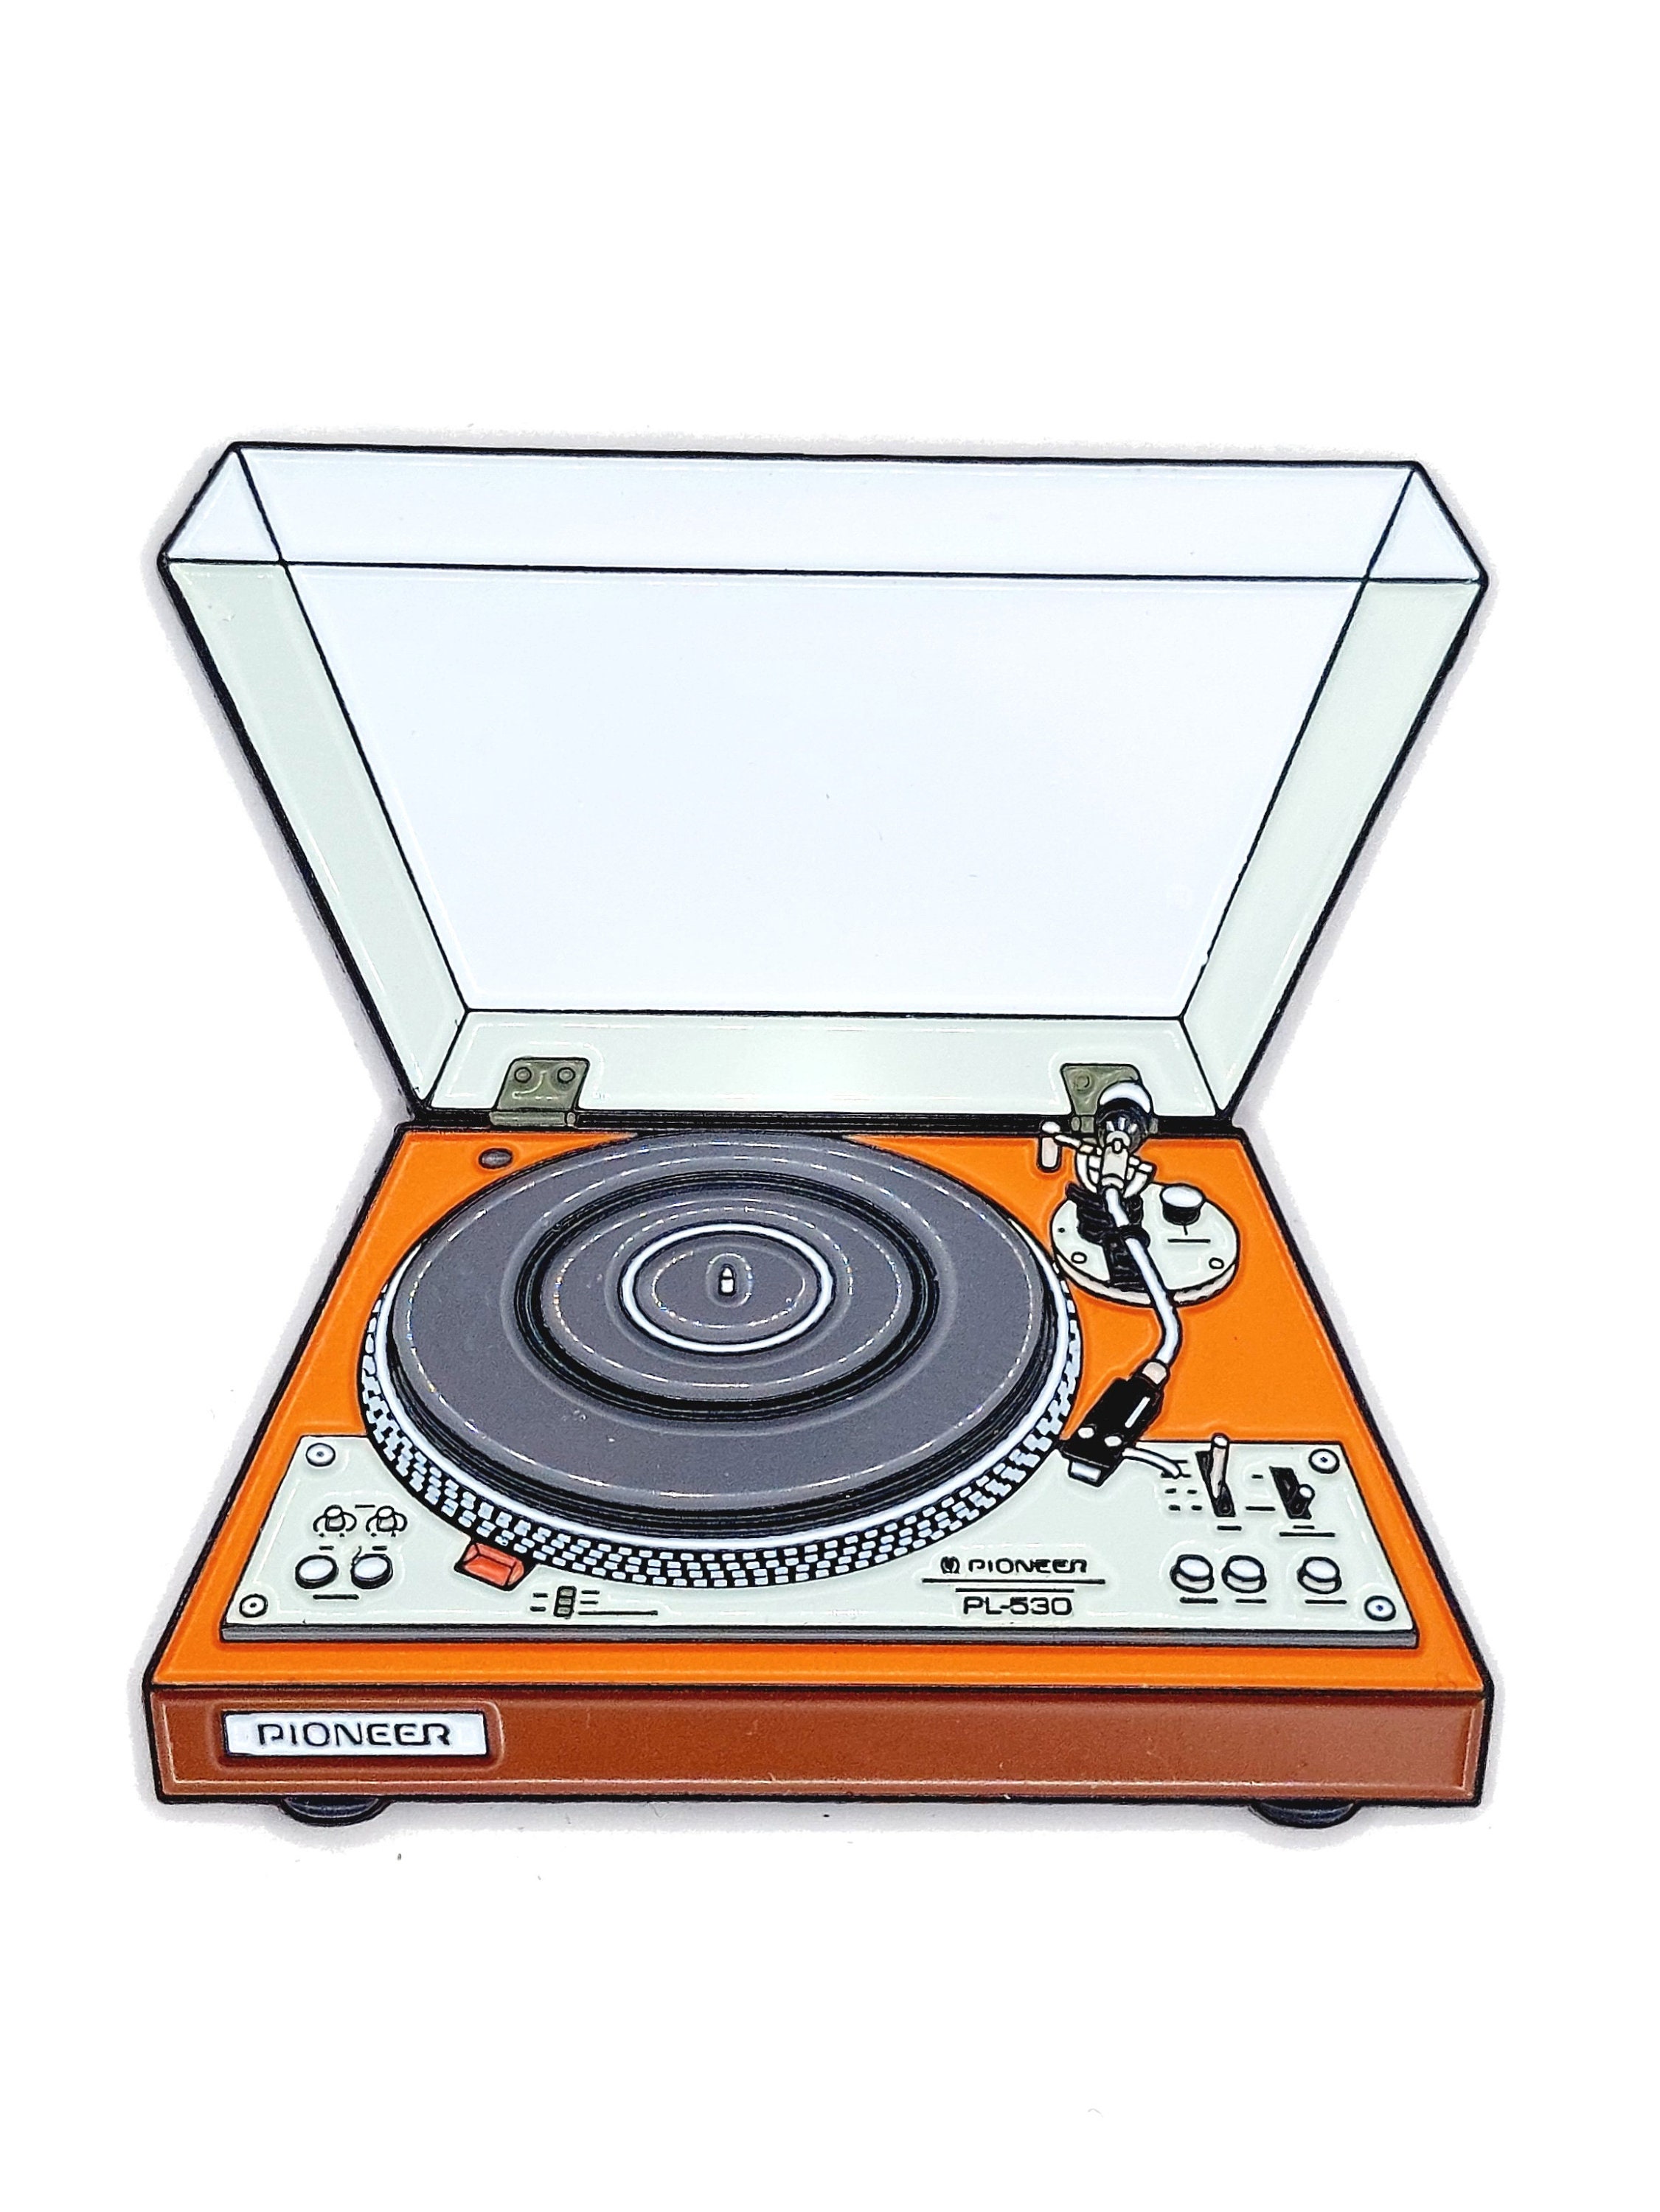 Pioneer Turntable image image picture